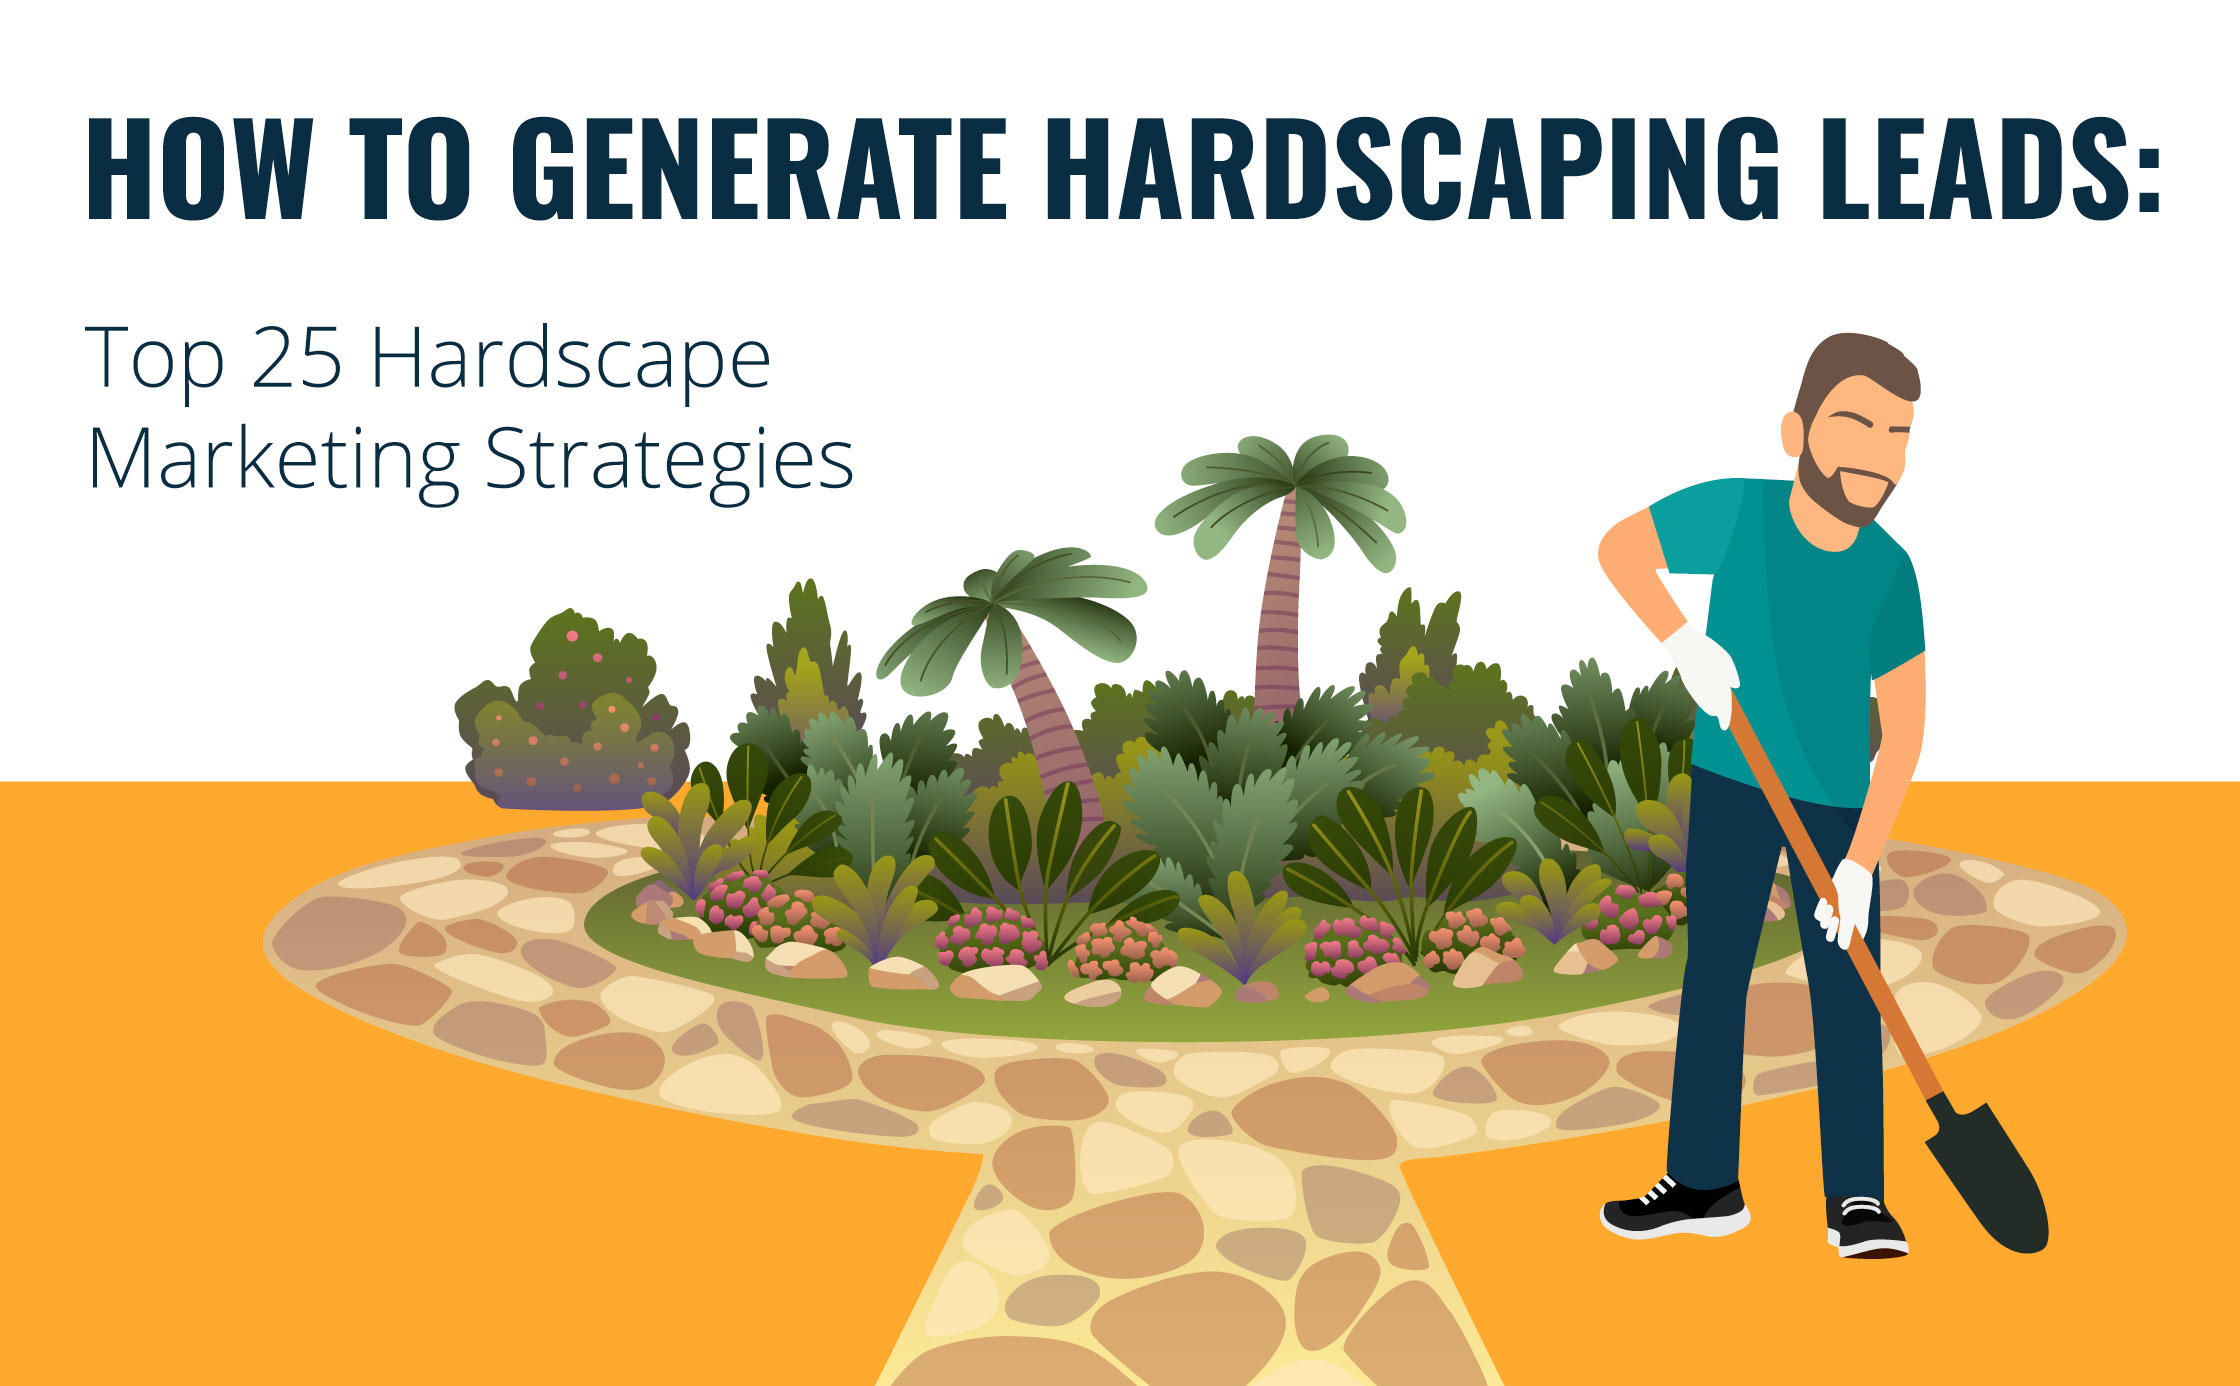 How to Generate Hardscaping Leads: Top 25 Hardscape Marketing Strategies